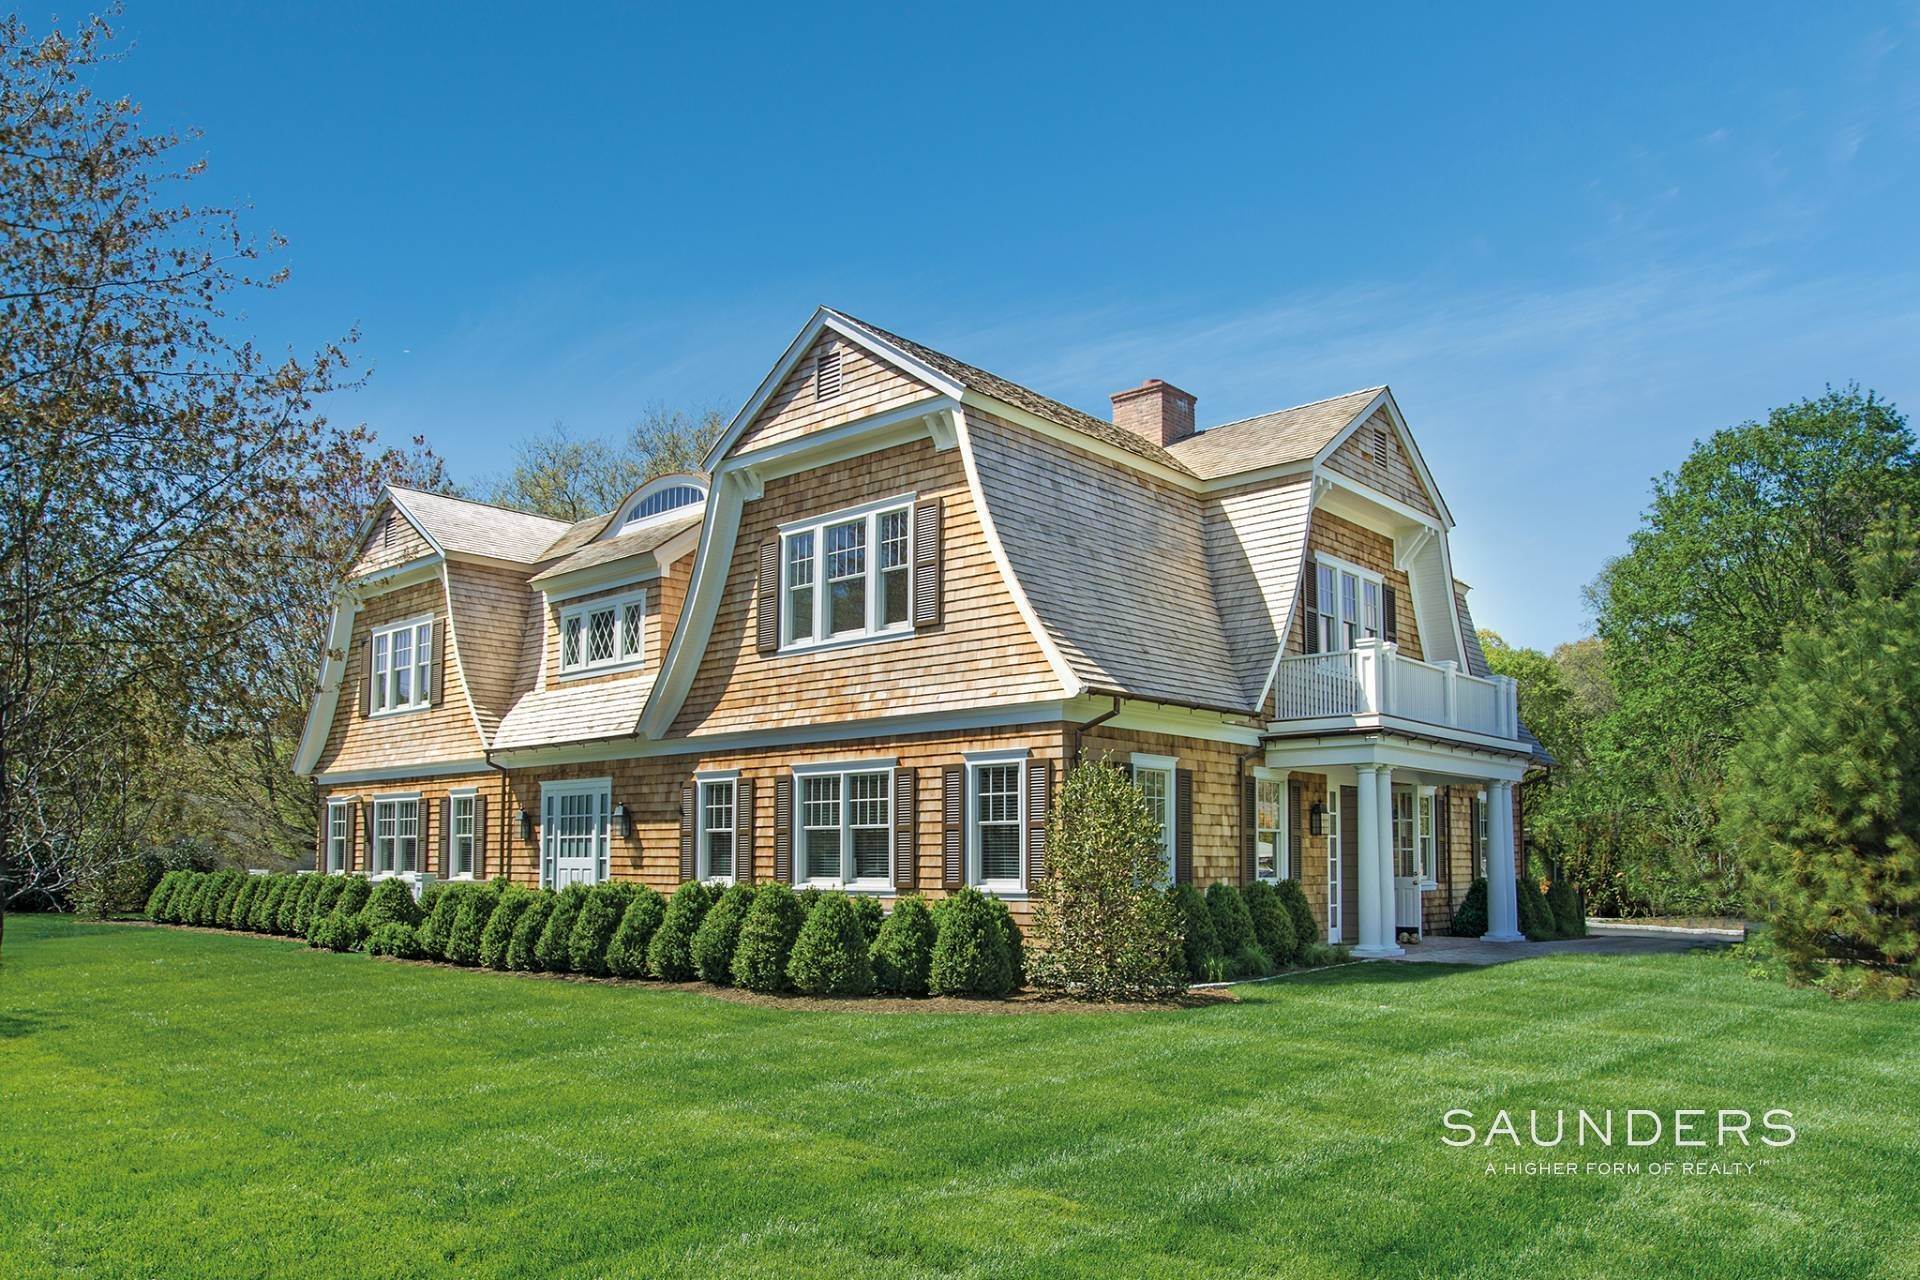 5. Commercial for Sale at The Most Exceptional Office Building In The Hamptons 26 Montauk Highway, East Hampton, NY 11937